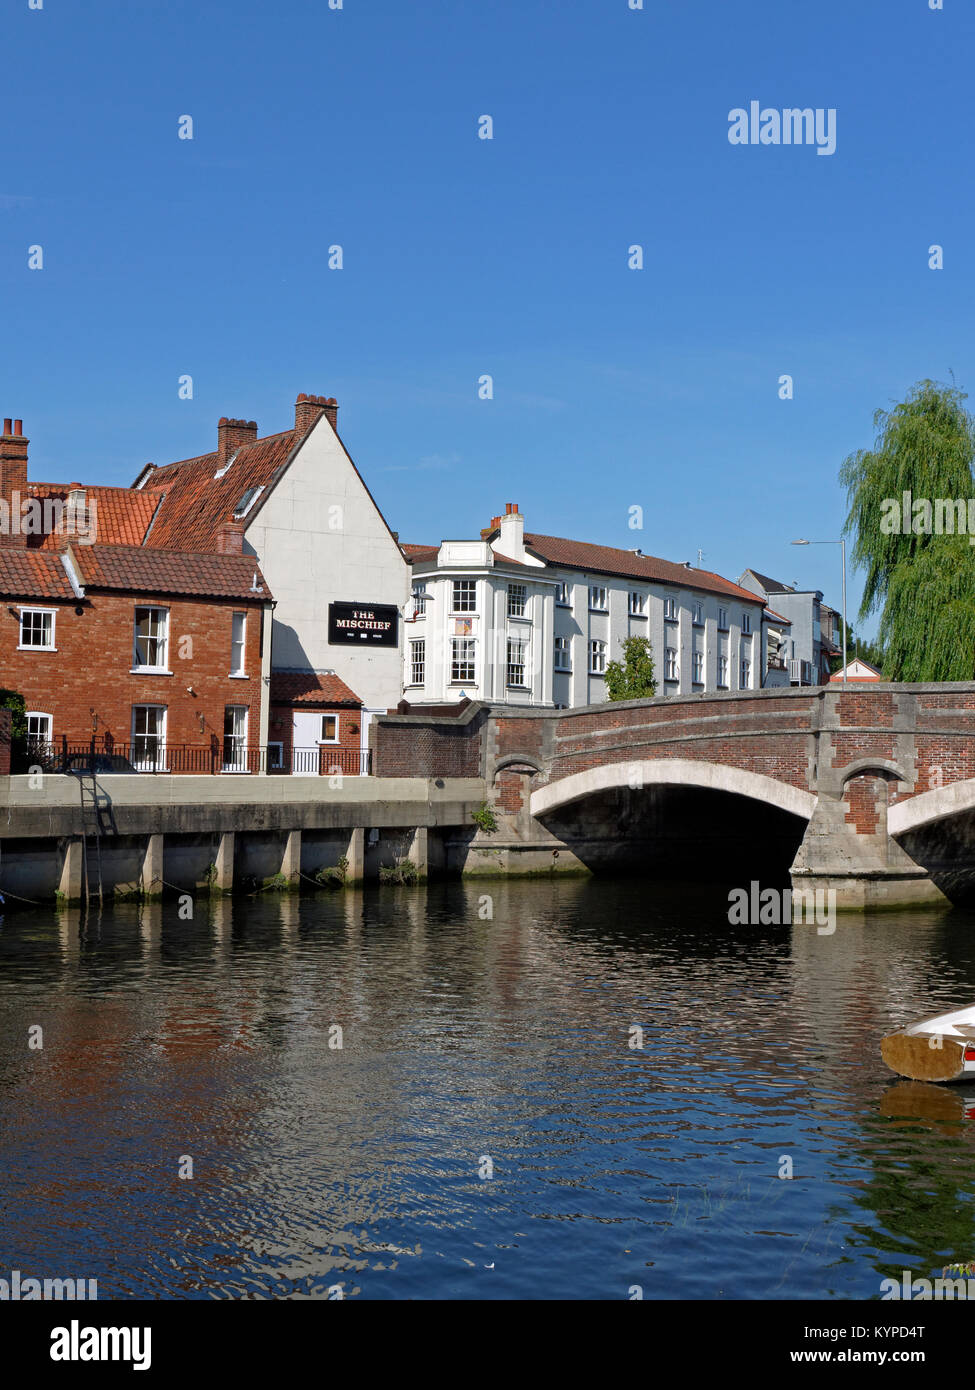 The River Wensum, at Fye Bridge in the Center of The Historic City of Norwich, Norfolk, England, UK Stock Photo